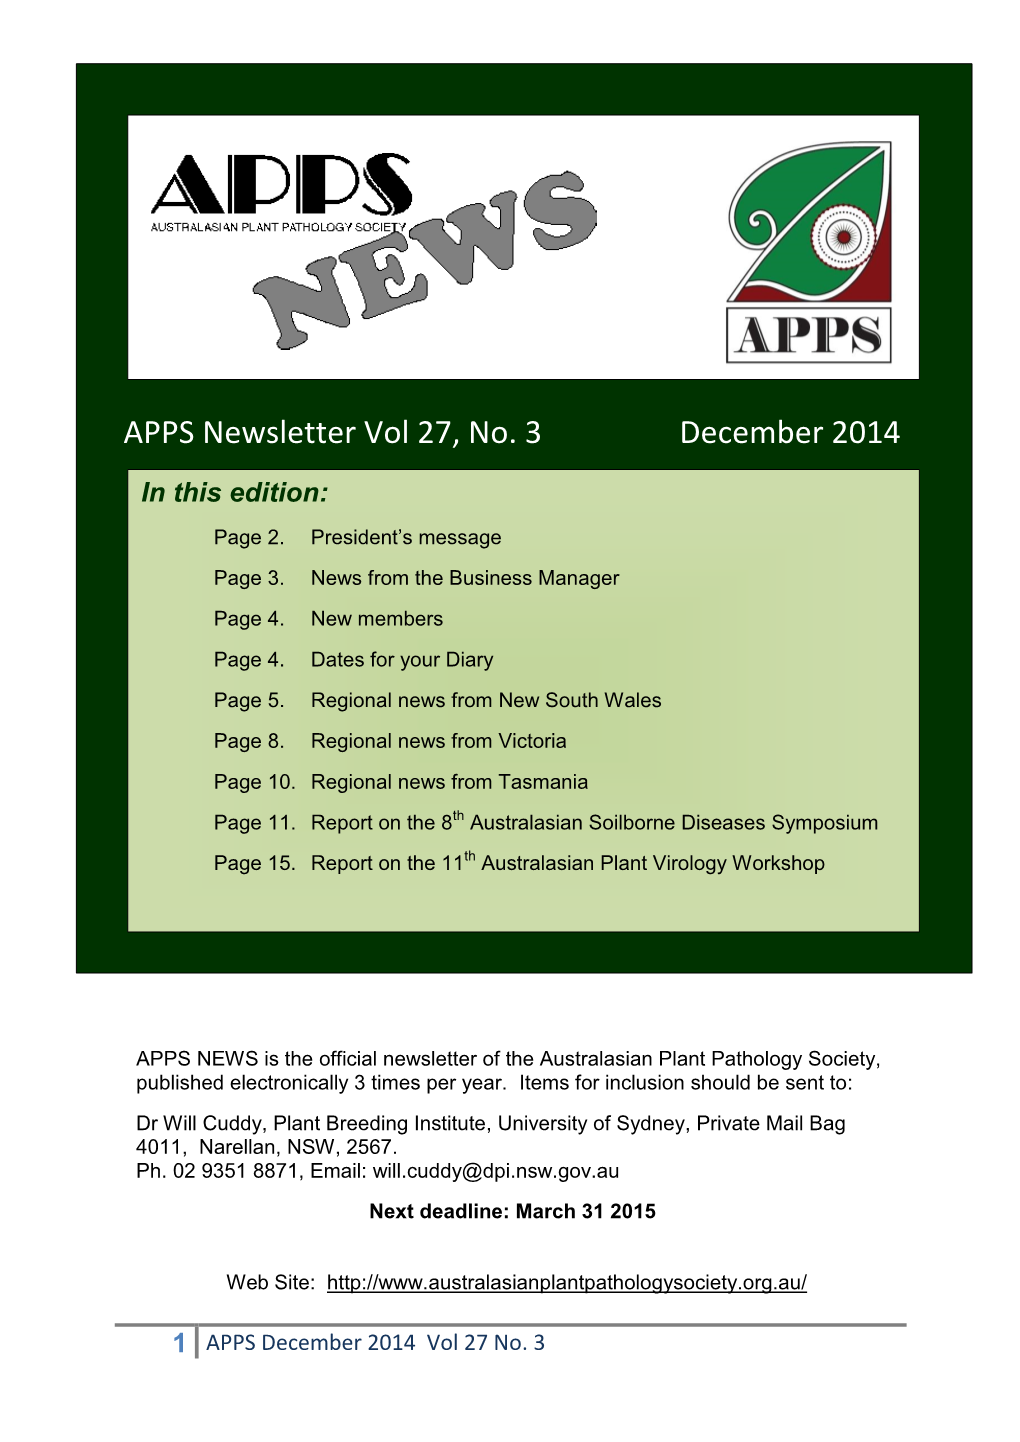 APPS Newsletter Vol 27, No. 3 December 2014 in This Edition